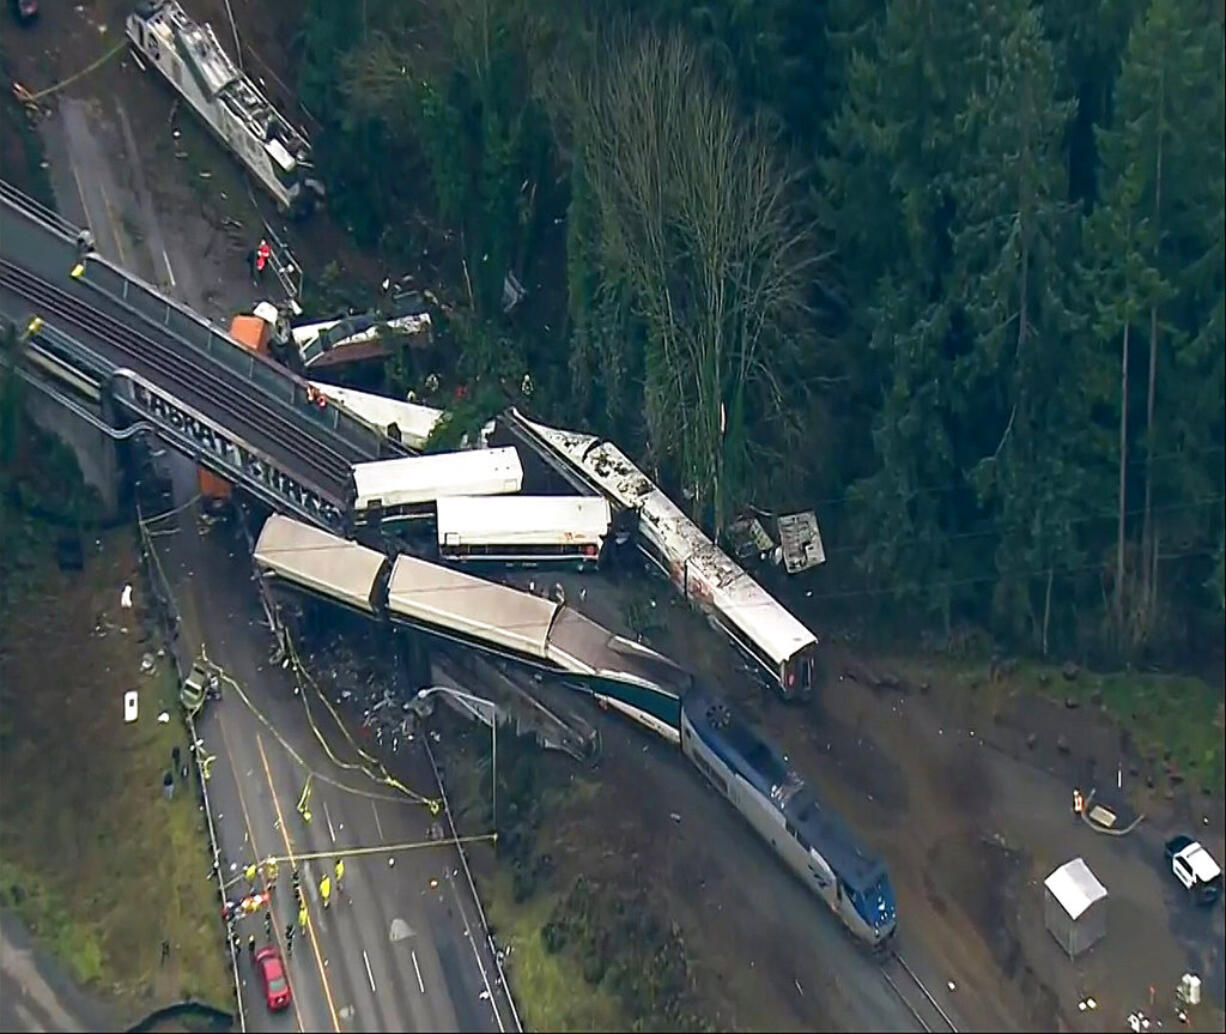 This aerial image from video provided by KOMO-TV, shows the site of an Amtrak train that derailed south of Seattle on Monday, Dec. 18, 2017. Authorities reported "injuries and casualties." The train derailed about 40 miles (64 kilometers) south of Seattle before 8 a.m., spilling at least one train car on to busy Interstate 5.